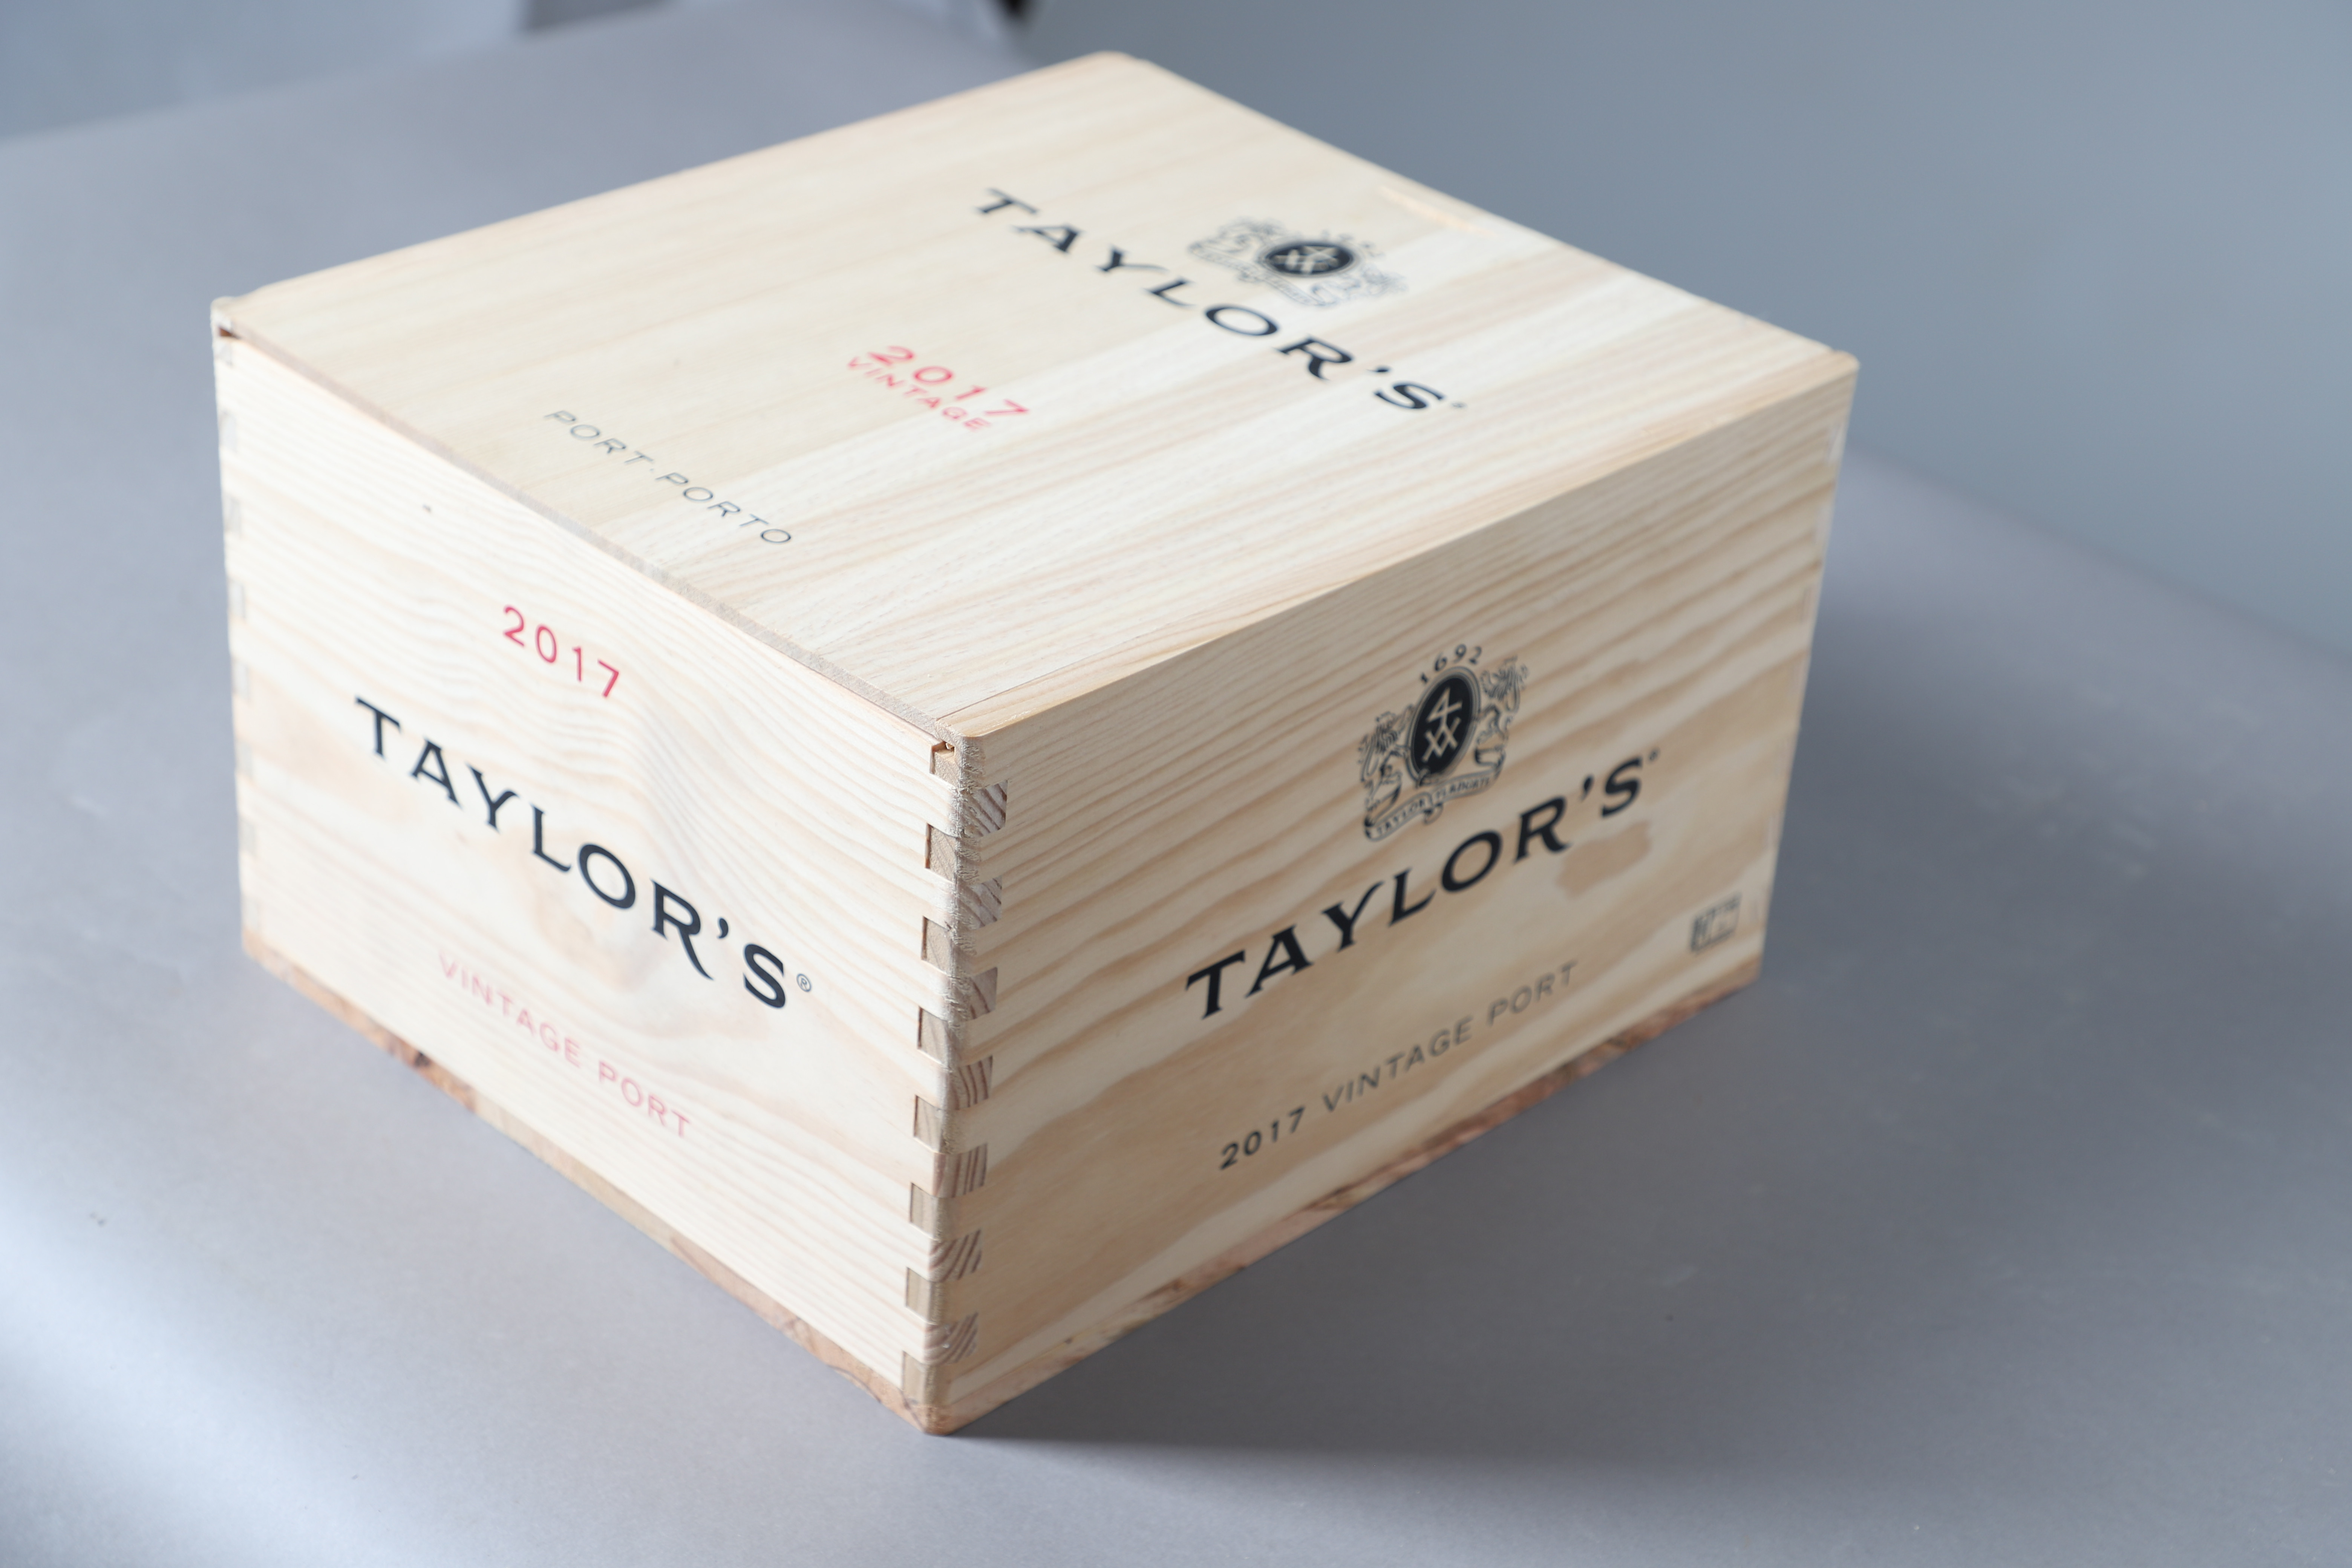 TAYLOR'S VINTAGE PORT 2017 - BOXED. - Image 2 of 6